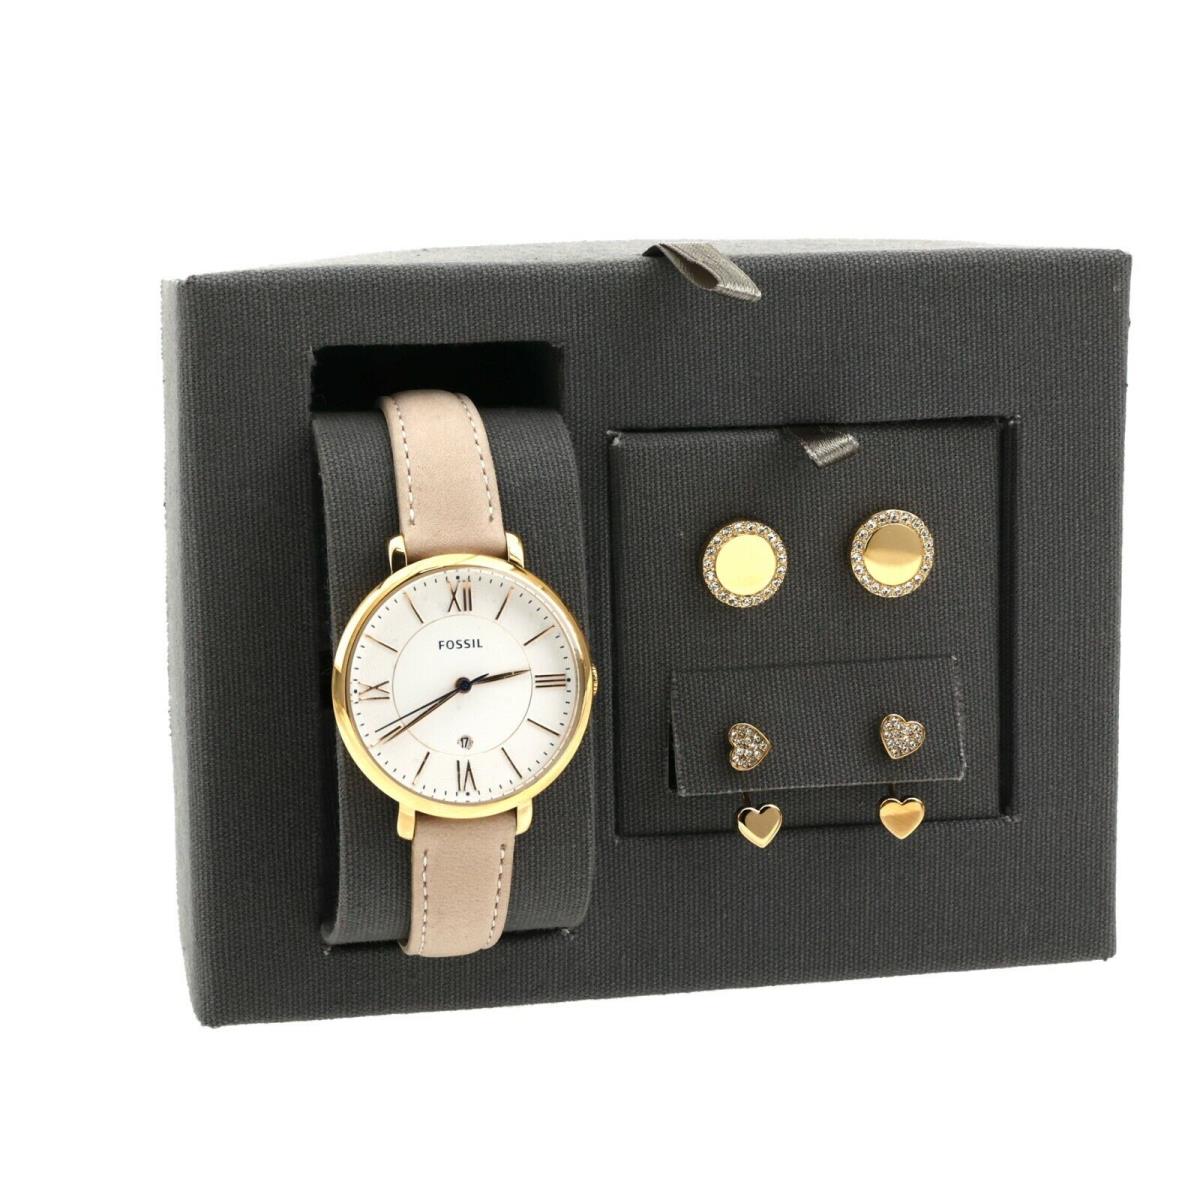 Fossil Women`s Jacqueline Pink Leather Rose Gold Strap Watch Stud Earrings 1221 - Dial: White, Band: Pink